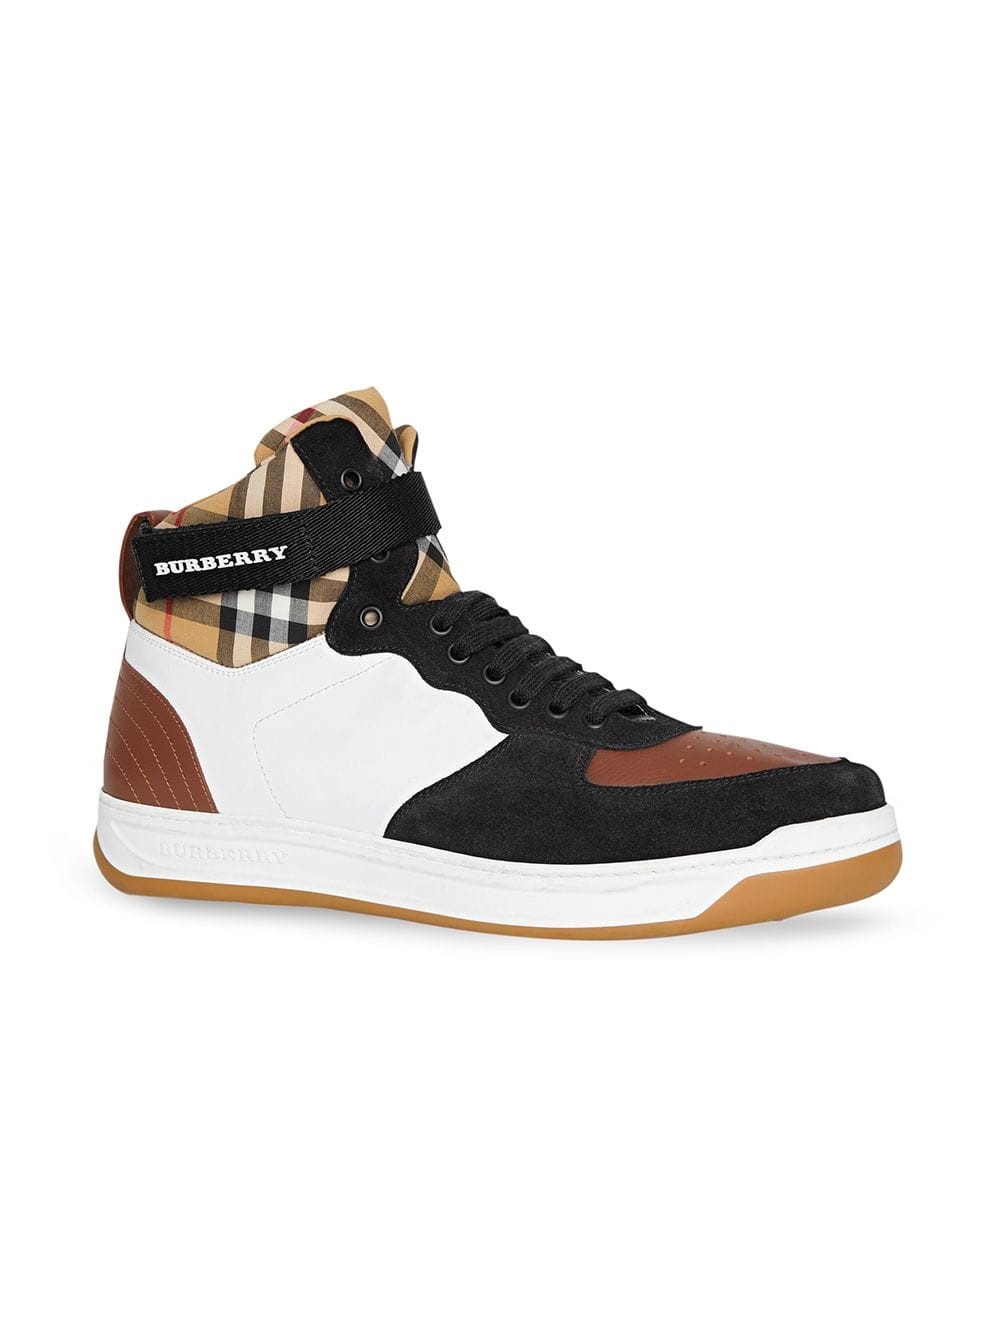 burberry london england DENNIS SNEAKERS available on www.strongerinc.org - 26274